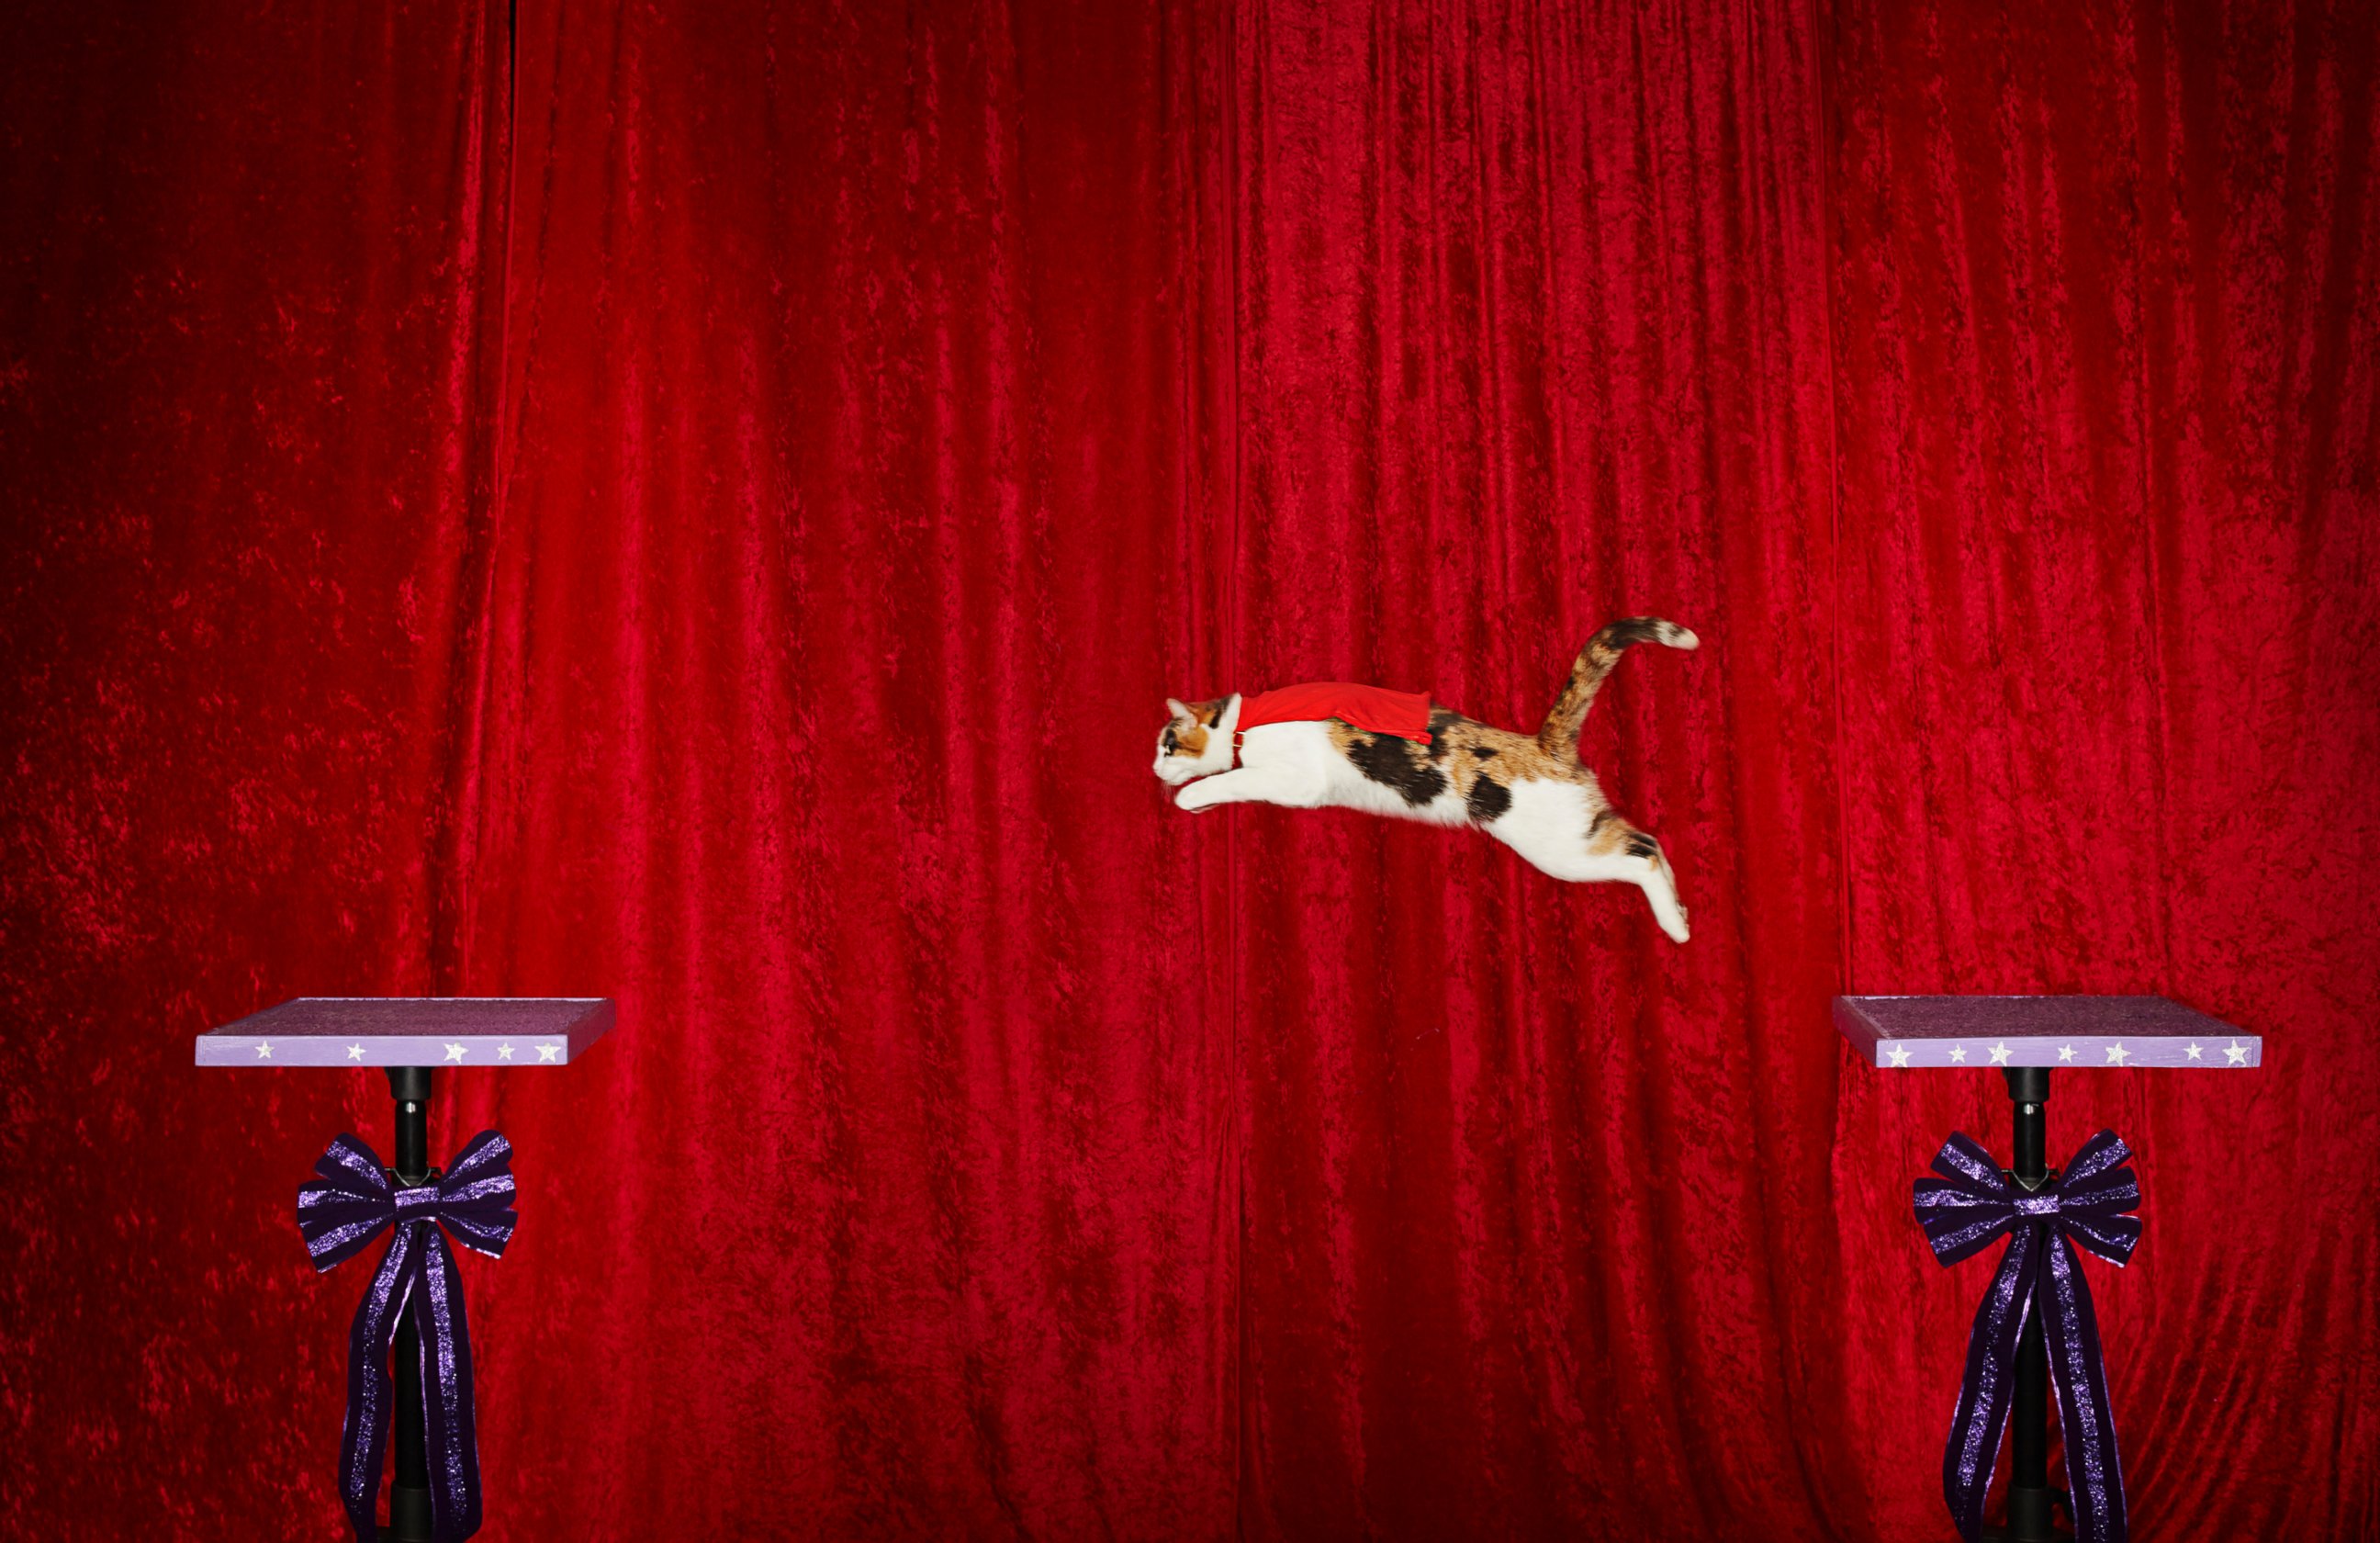 PHOTO: The longest jump by a cat is 182.88 cm (6 ft) and was achieved by Alley, owned by Samantha Martin (USA), in Austin, Texas.